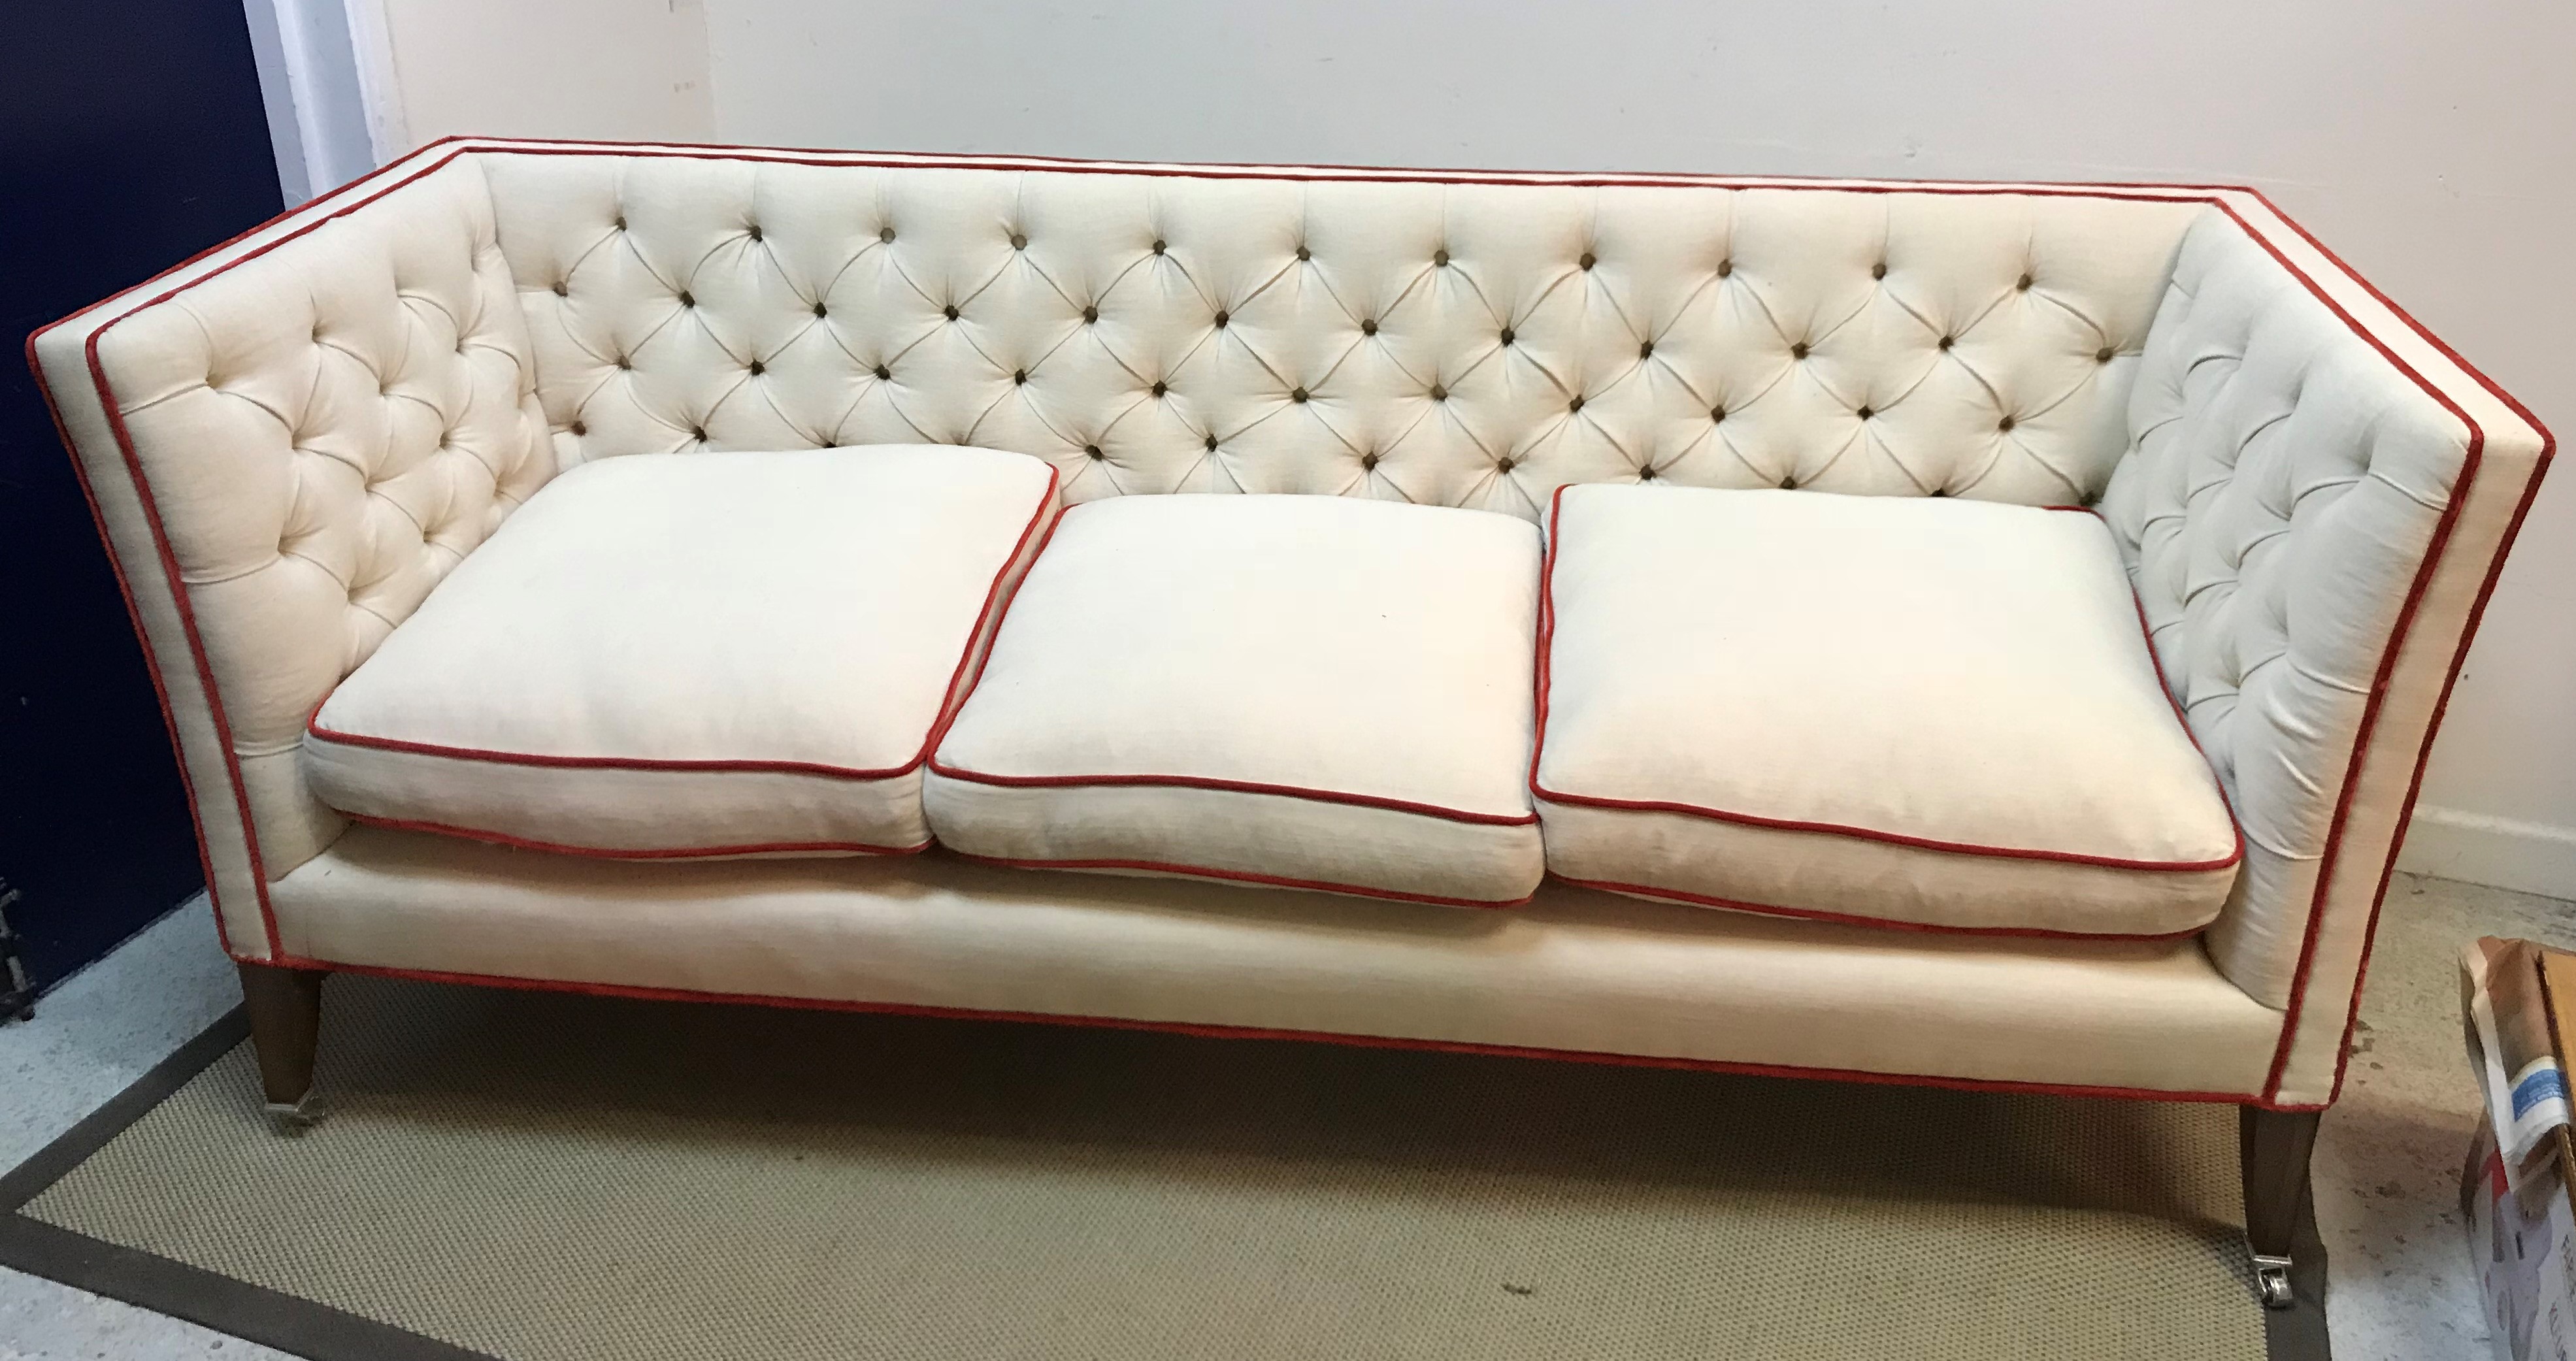 A Lawson Wood cream buttoned knowle style three seat sofa with scarlet velvet piping,